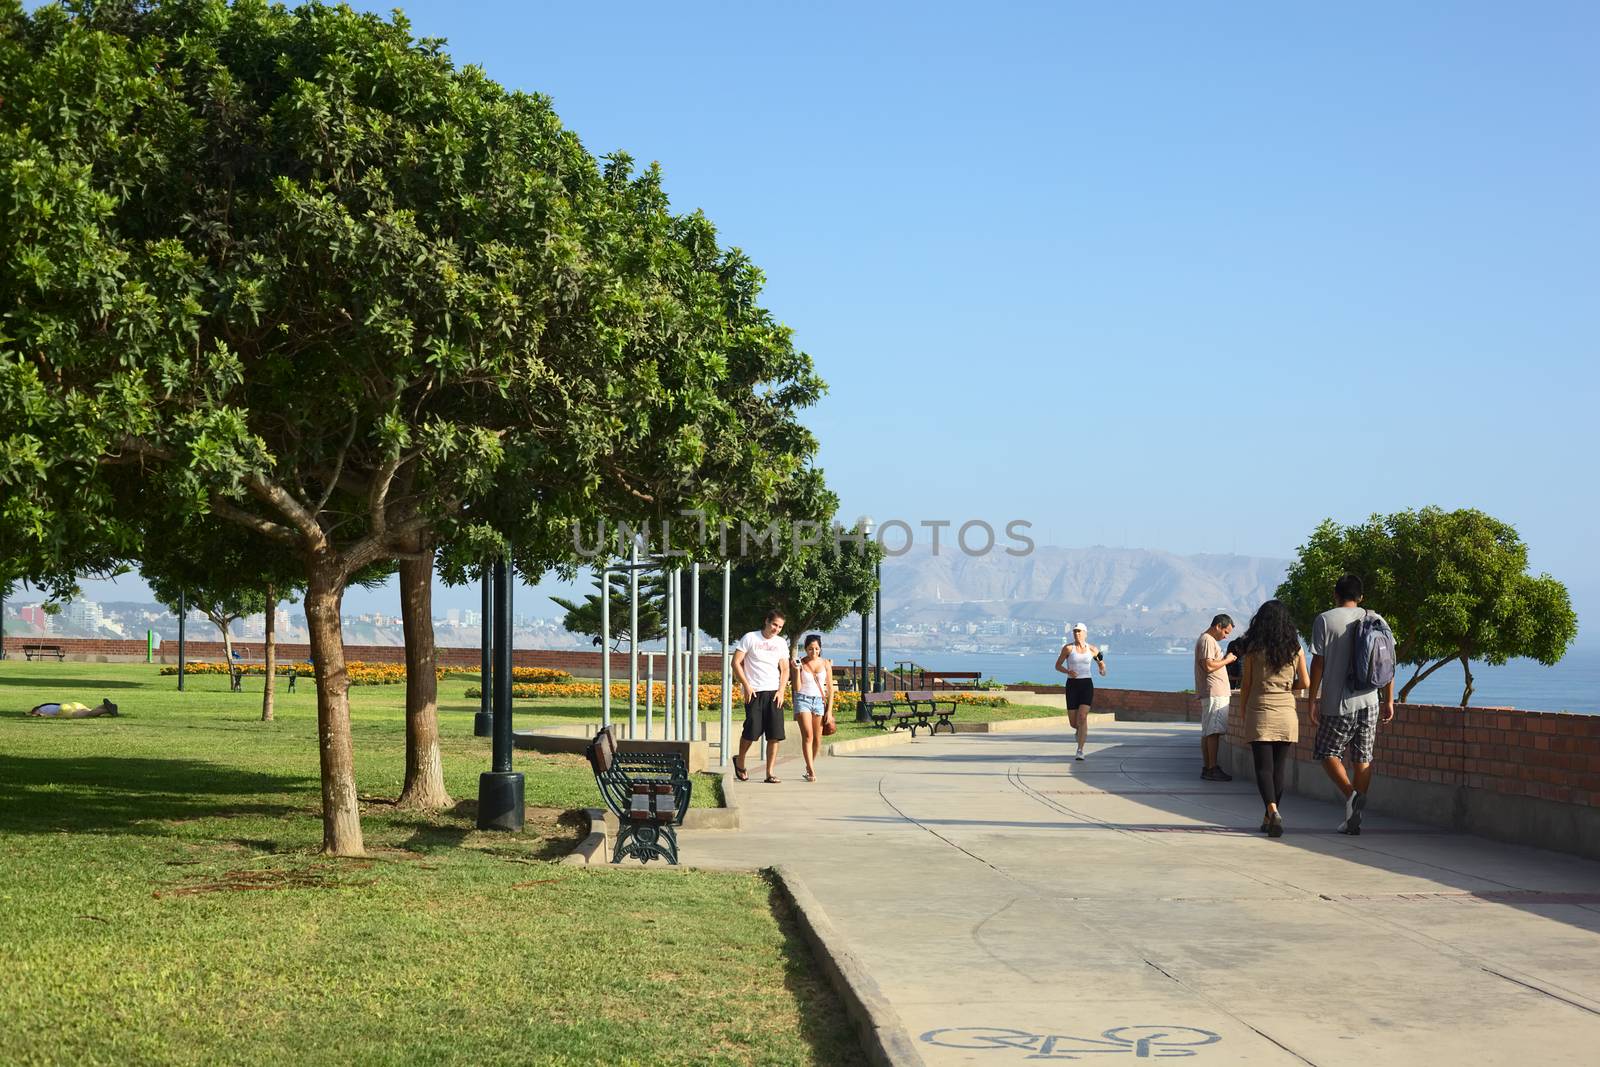 LIMA, PERU - MARCH 30, 2012: Unidentified people in Antonio Raimondi Park on the coast of the district of Miraflores with view onto the southern coastline of Lima in the back on March 30, 2012 in Lima, Peru. This coastal park is very popular for leisure and sport.